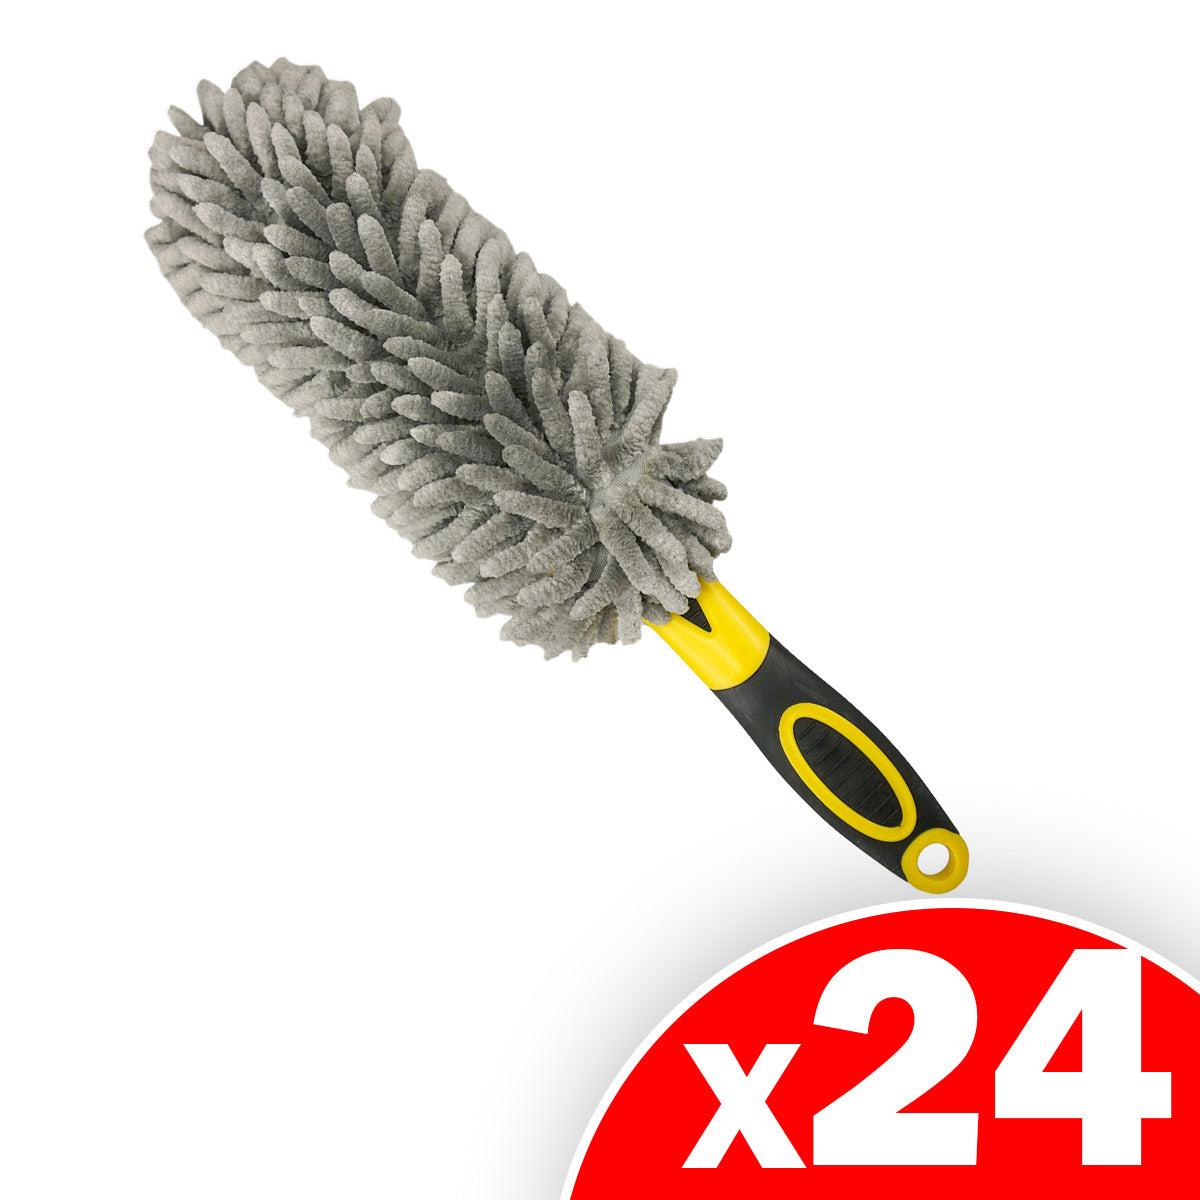 Dual-Sided Car Wash Wand: With Chenille Microfiber for Deep Cleaning, 24 Pack